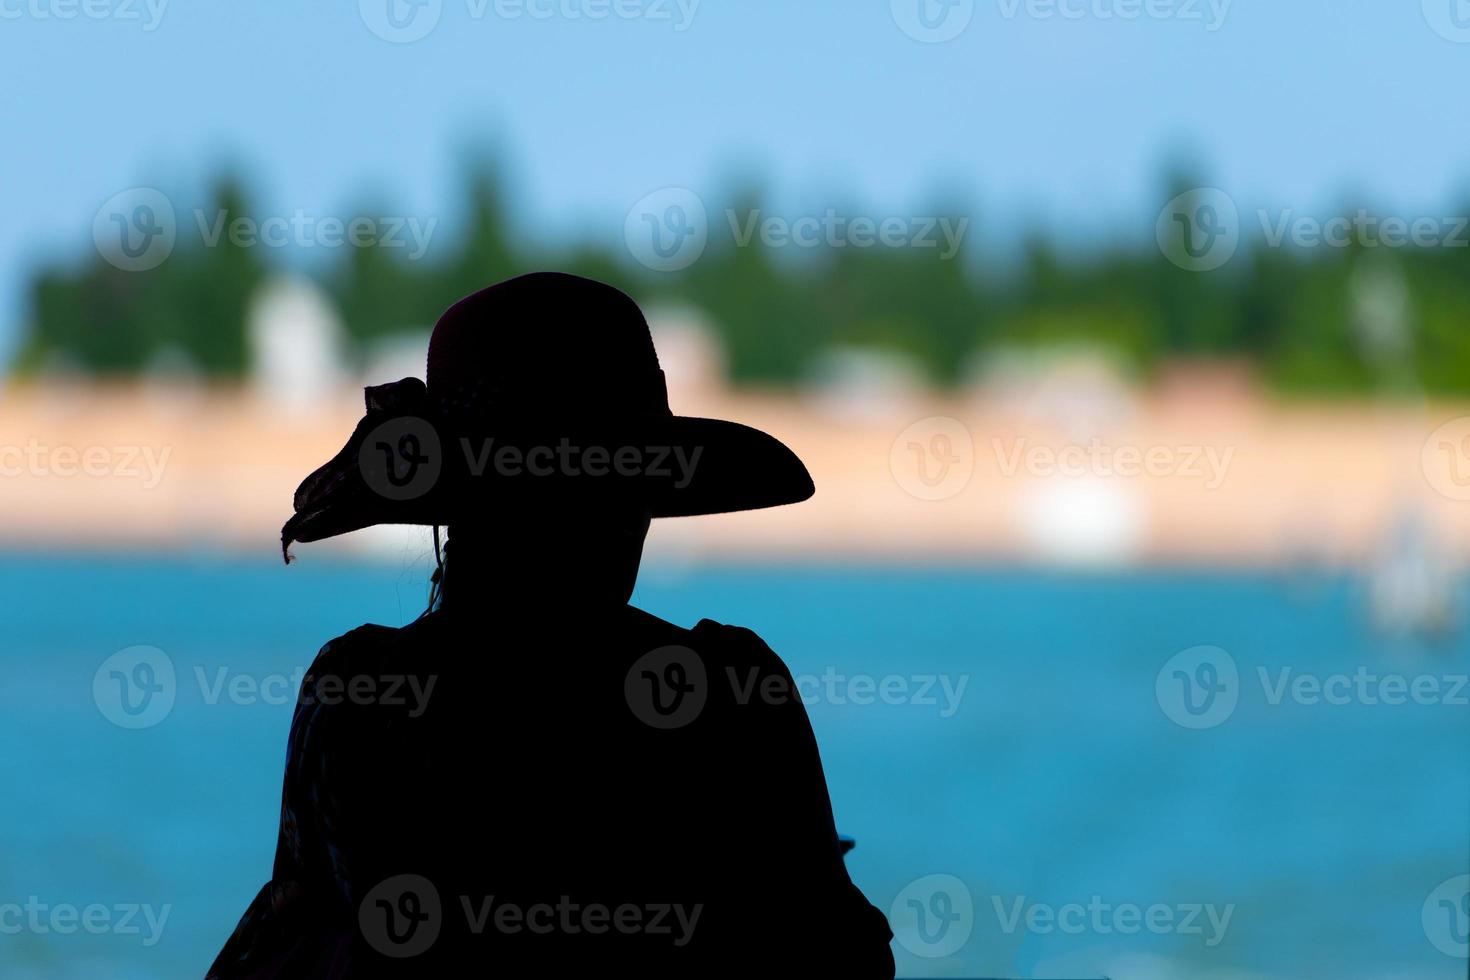 Silhouette of tourist with sun hat looks at the Venetian lagoon in blurred background photo